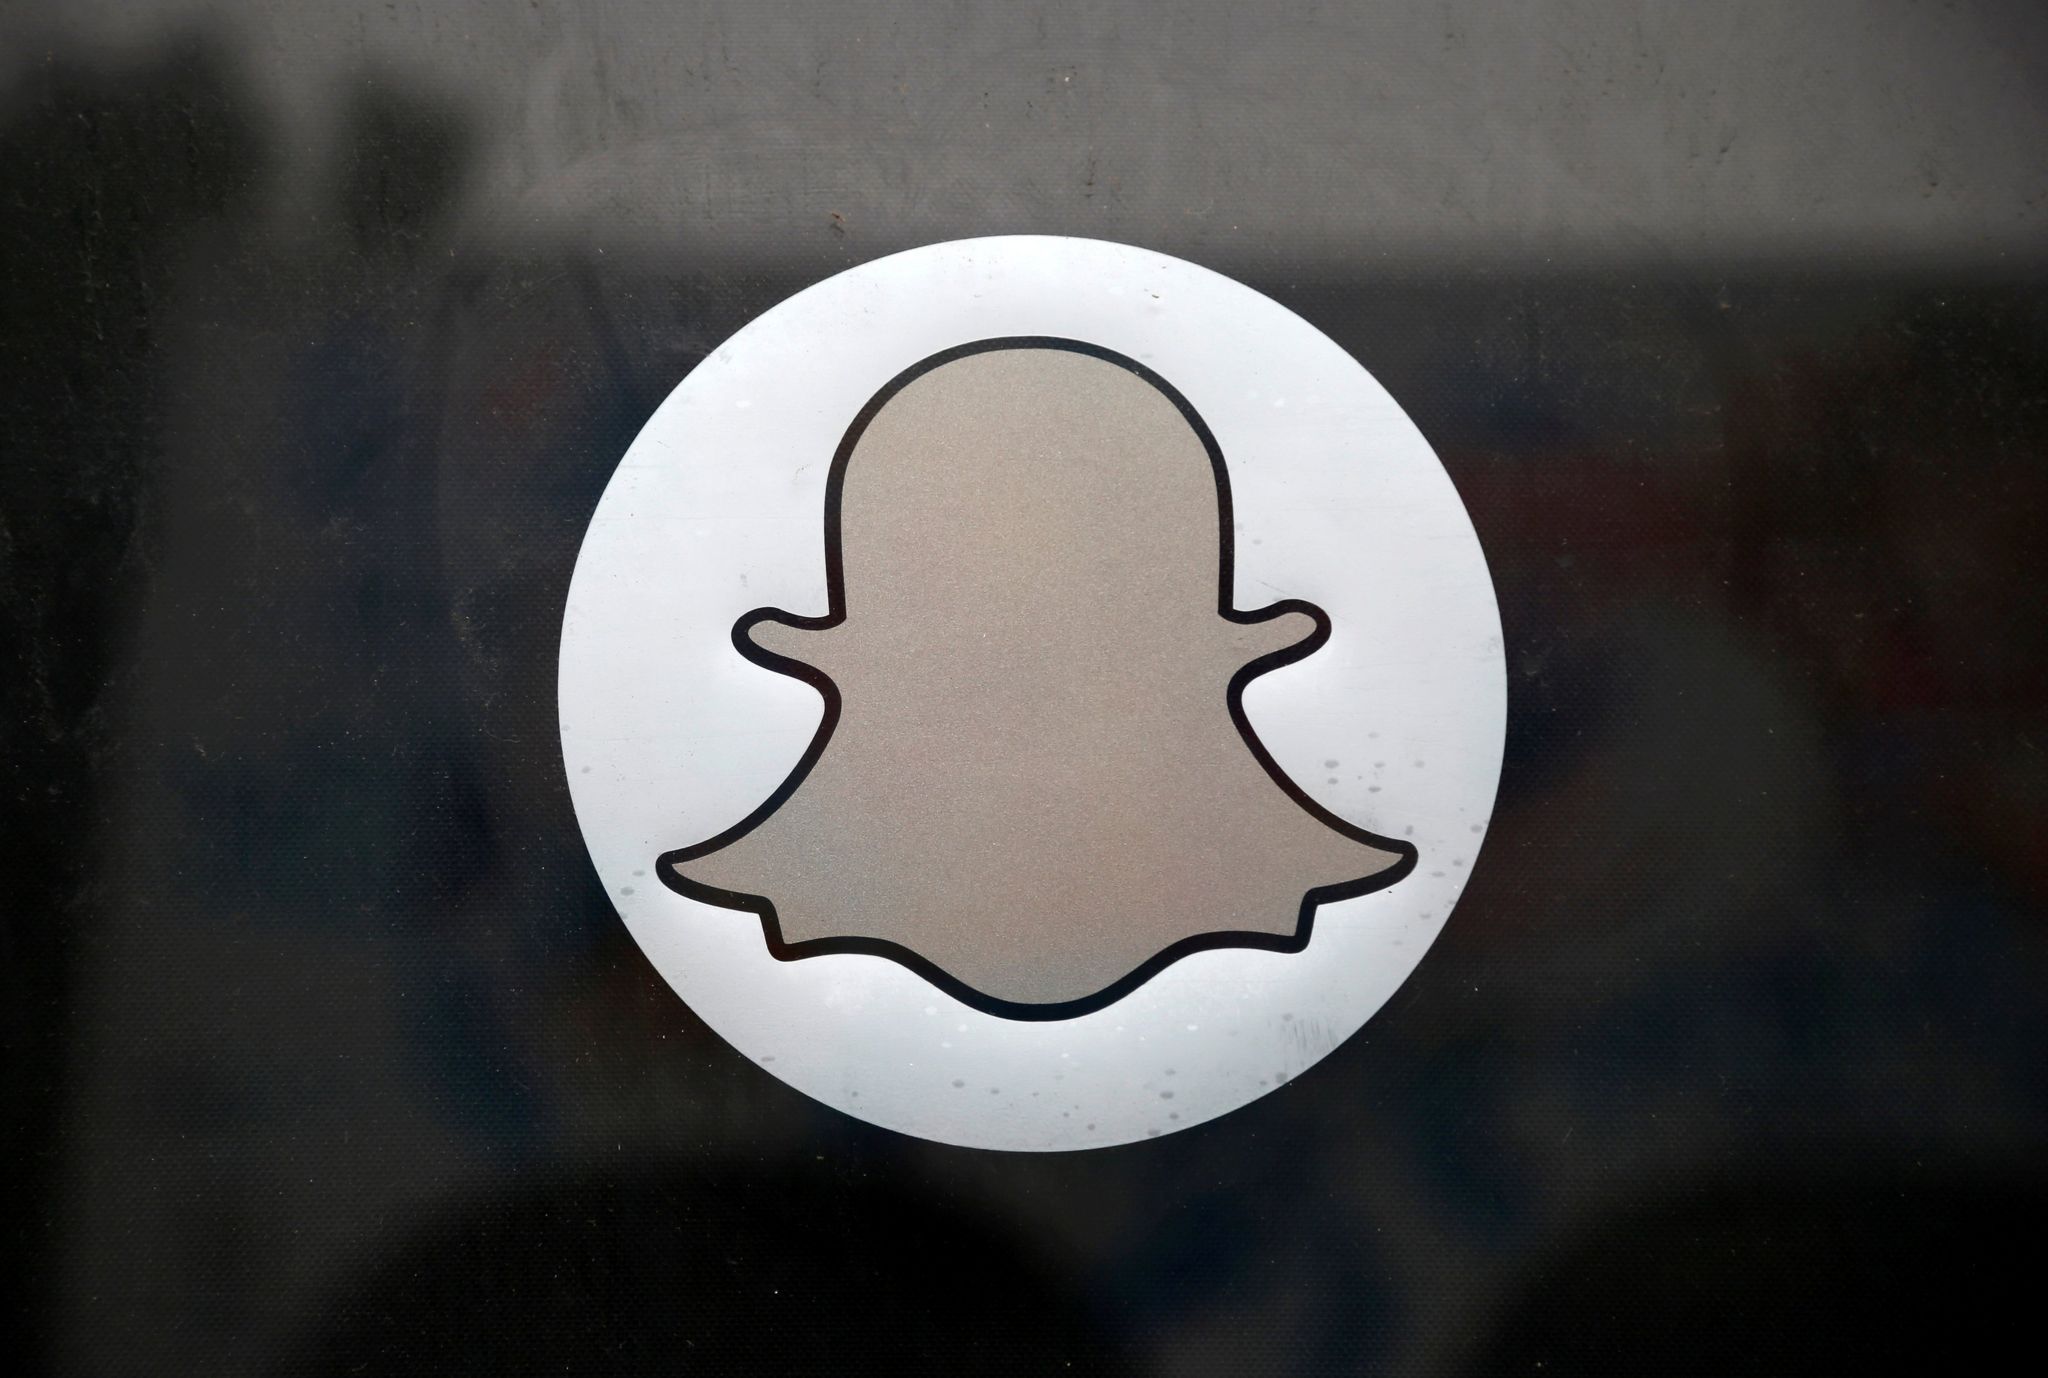 The Snapchat logo is seen on the door of their headquarters in Venice, Los Angeles, California 13 October 2014